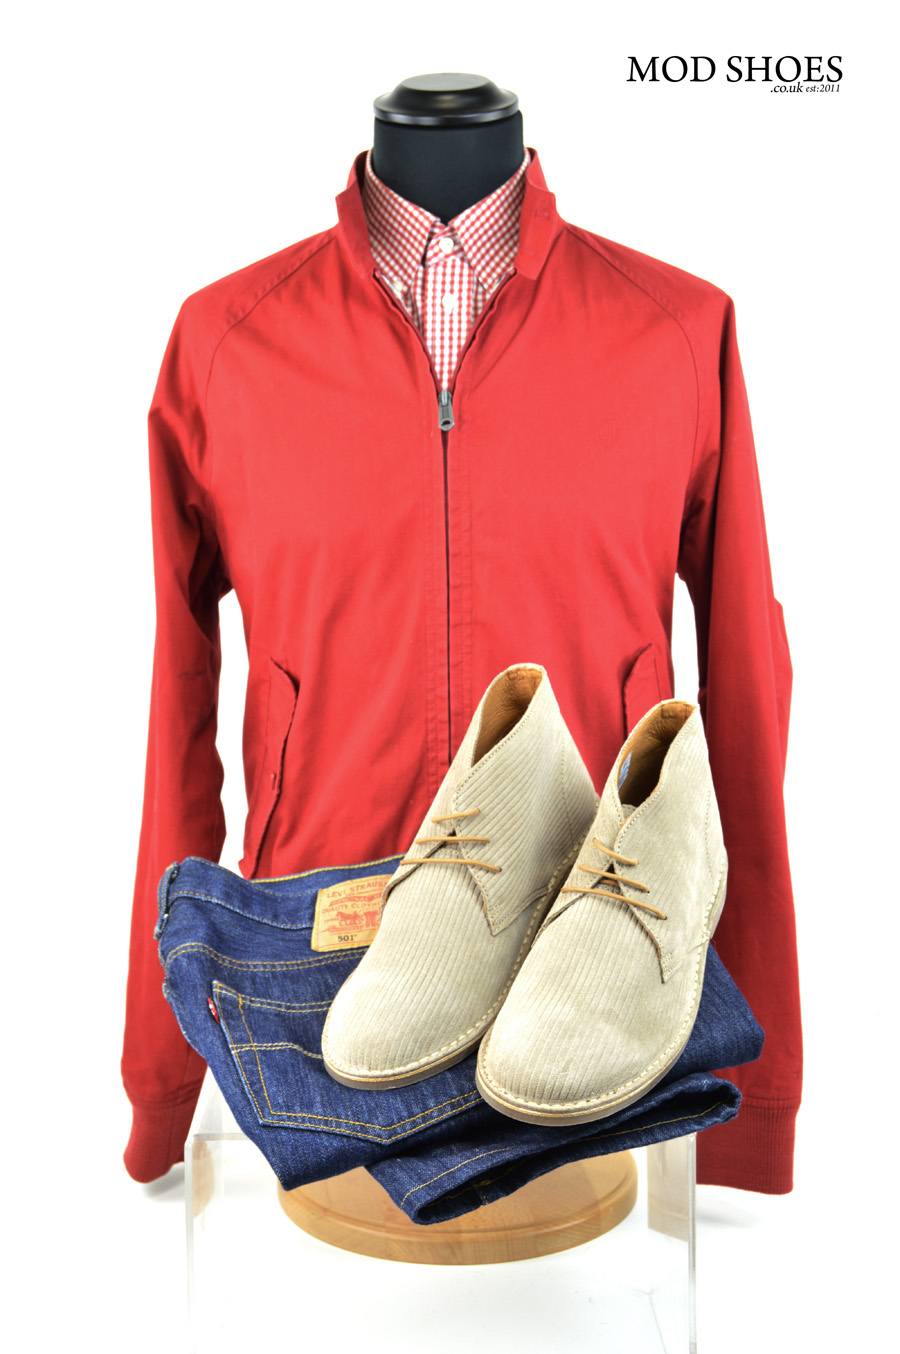 modshoes deset boots with harrington in red